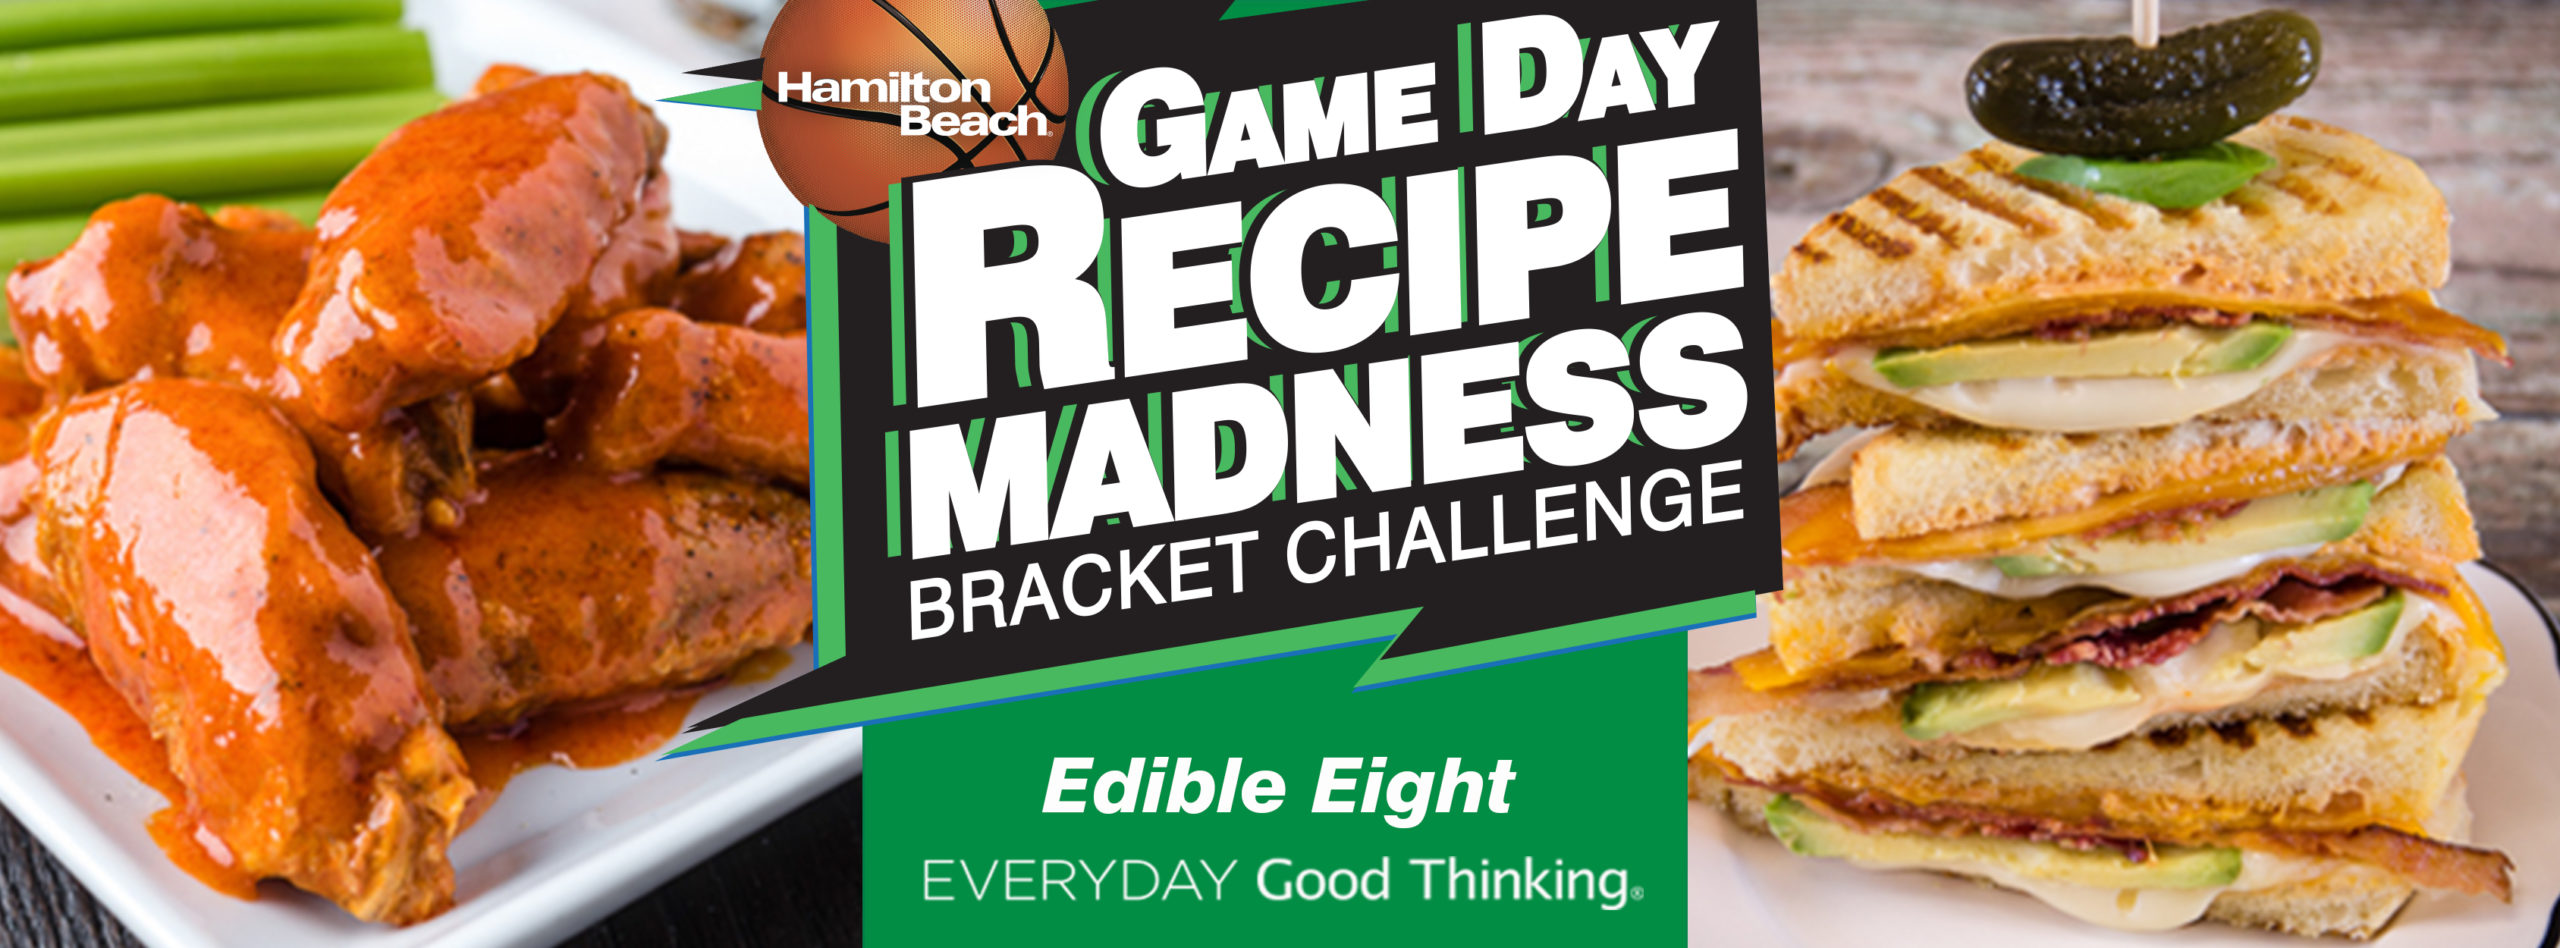 Game Day Recipe Madness Bracket Challenge: Edible Eight